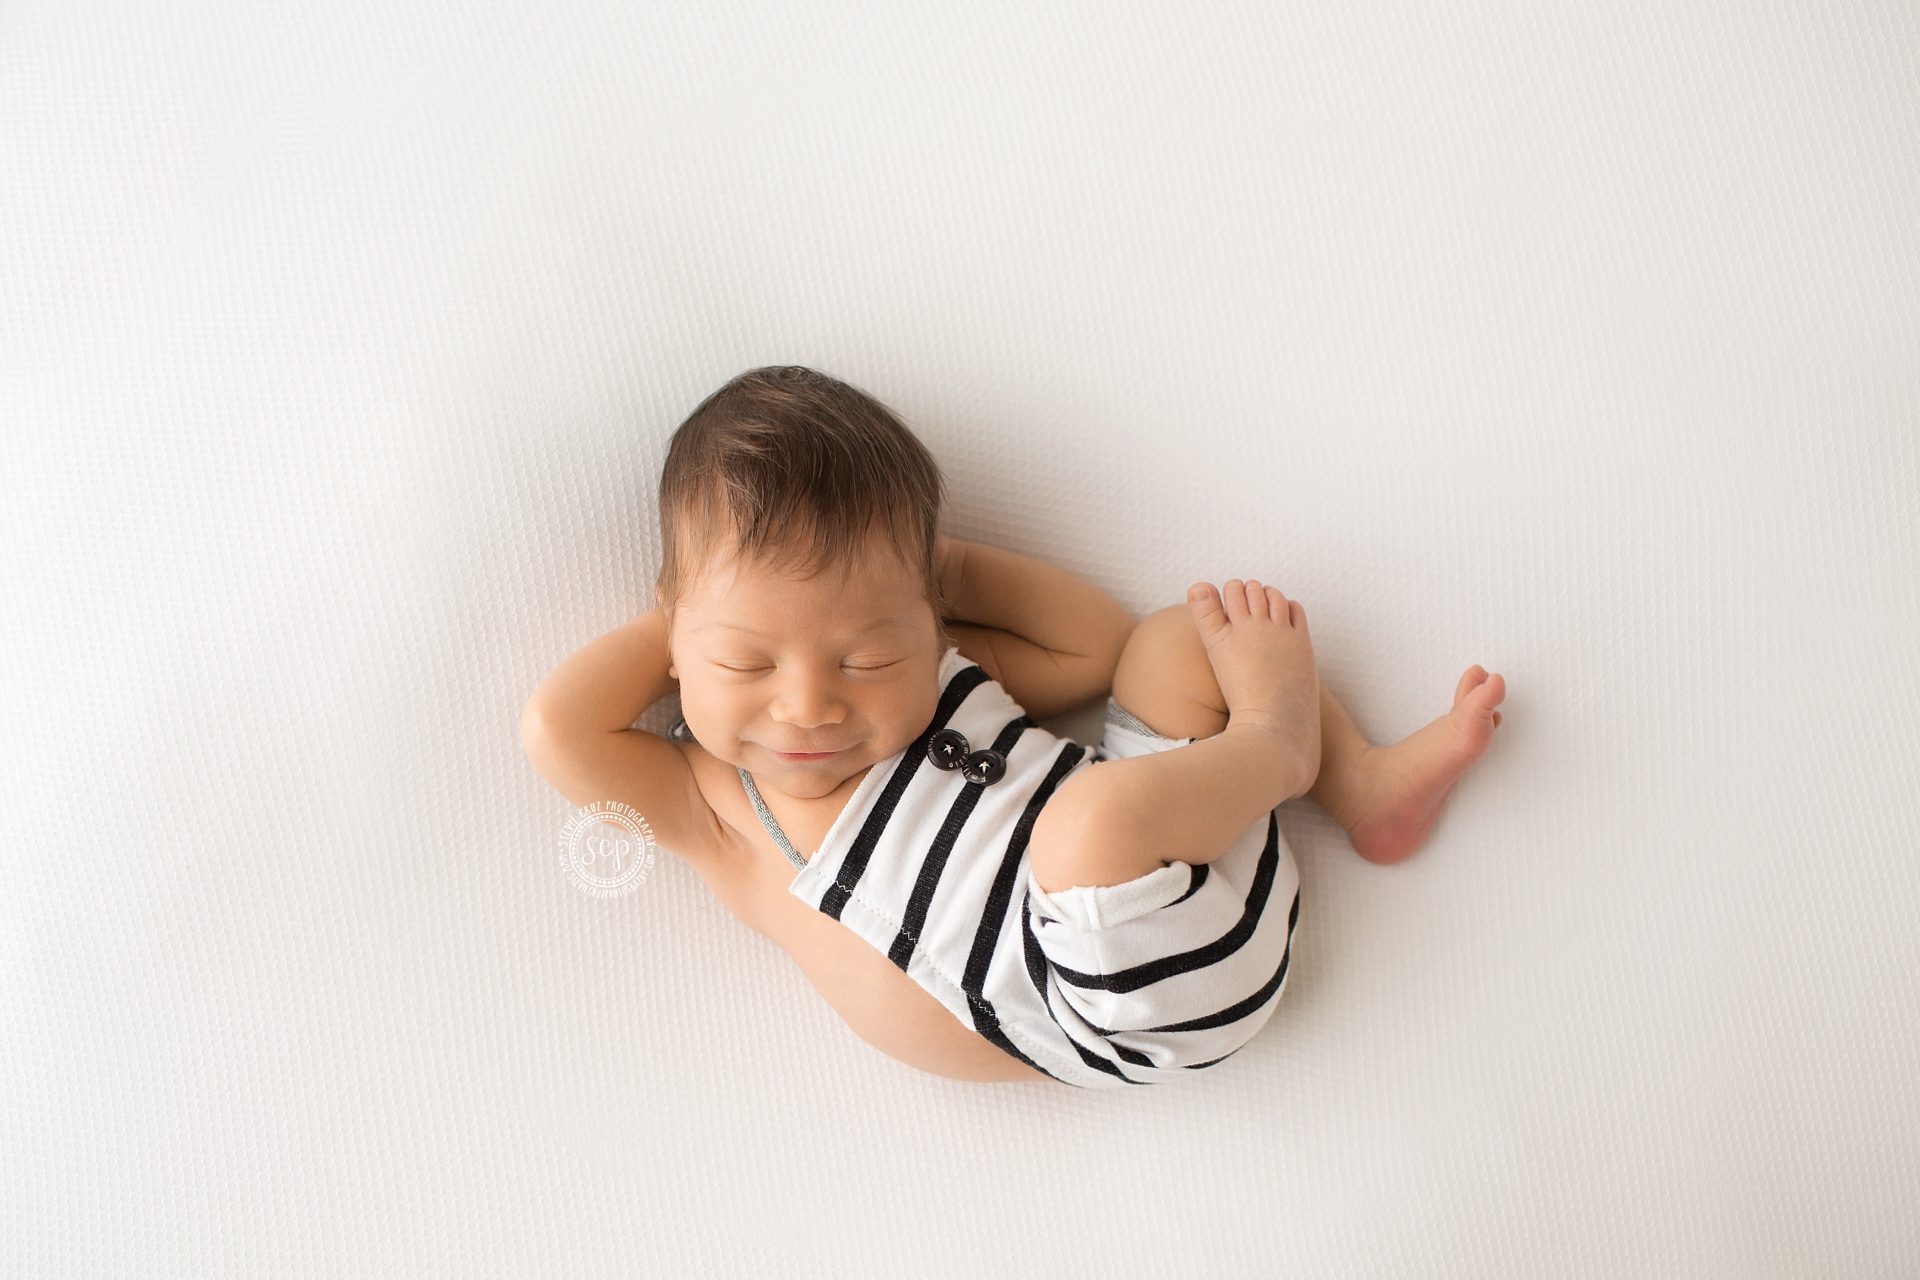 the most adorable newborn baby posing ever. How cute is this outfit this baby boy is wearing? how sweet and cool he is